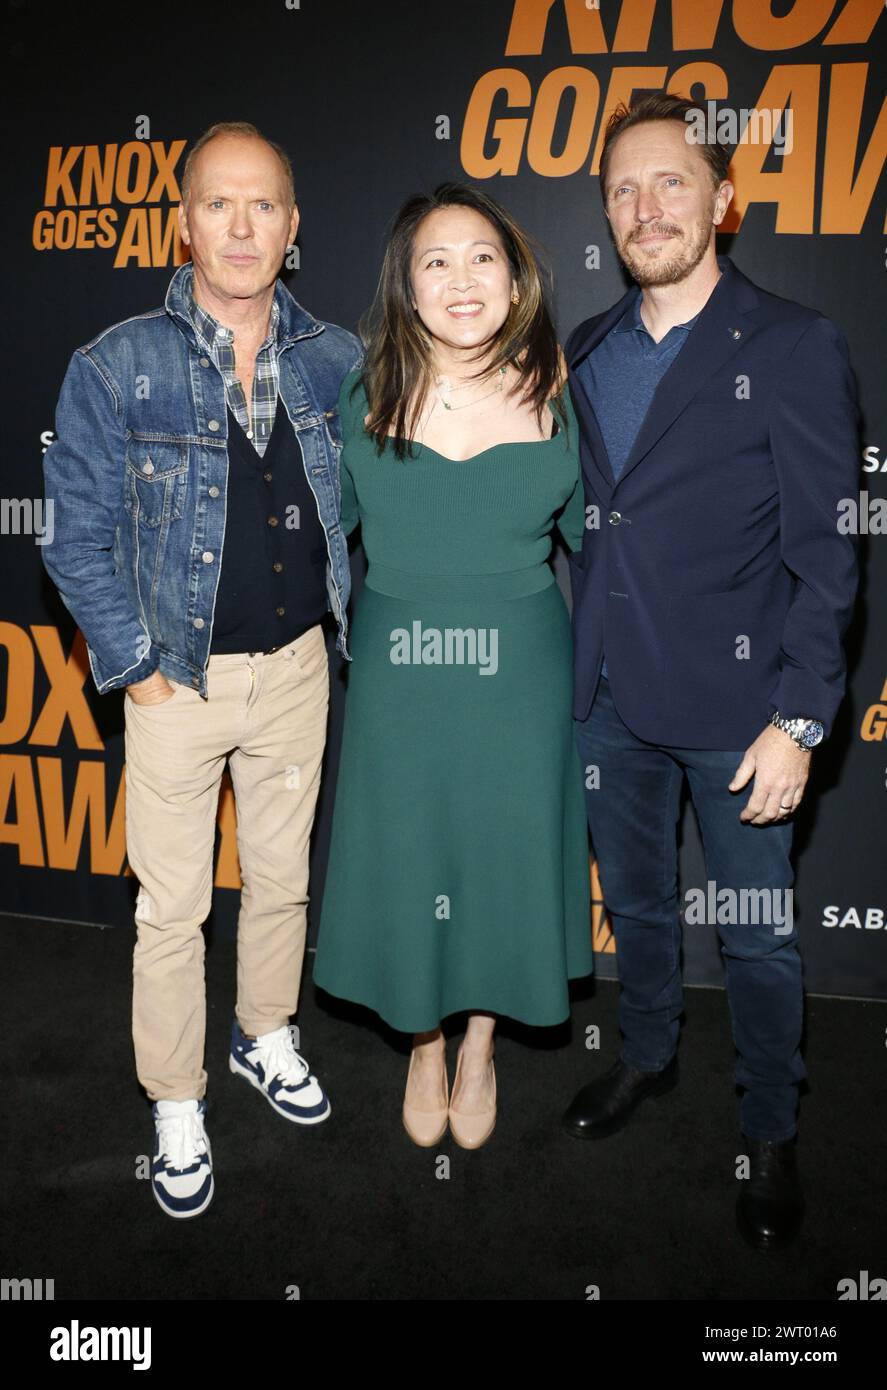 Michael Keaton, Suzy Nakamura and John Hoogenakker at the Los Angeles premiere of 'Knox Goes Away' held at the Academy Museum of Motion Pictures in Los Angeles, USA on March 14, 2024. Stock Photo